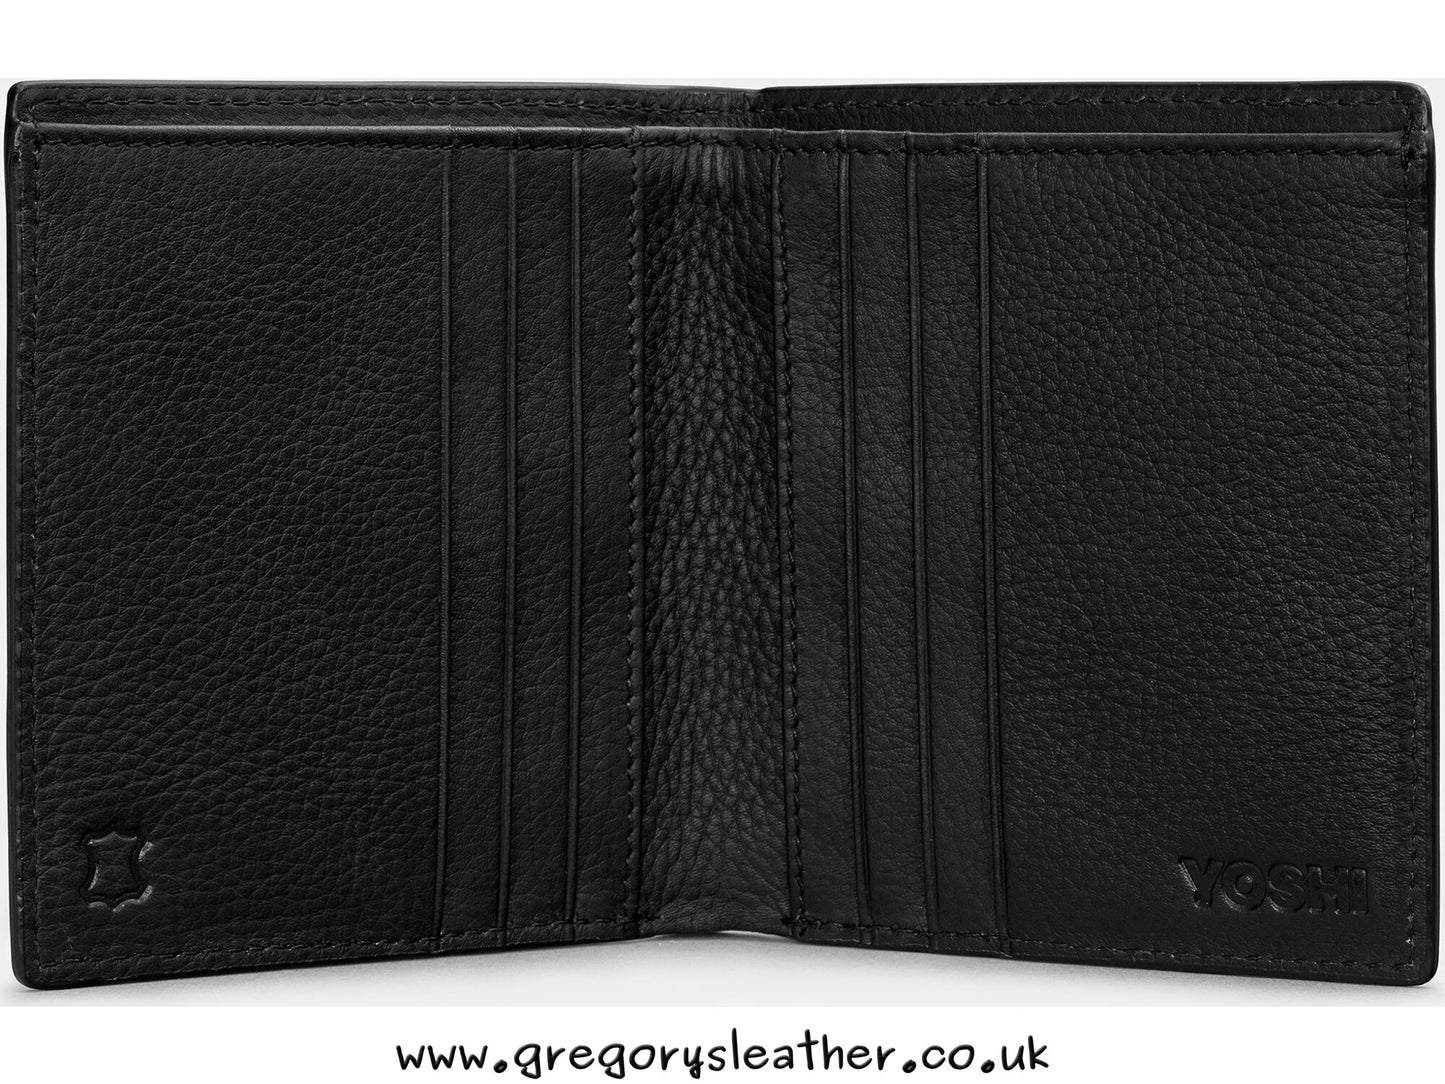 Black Two Fold North South Leather Wallet by Yoshi